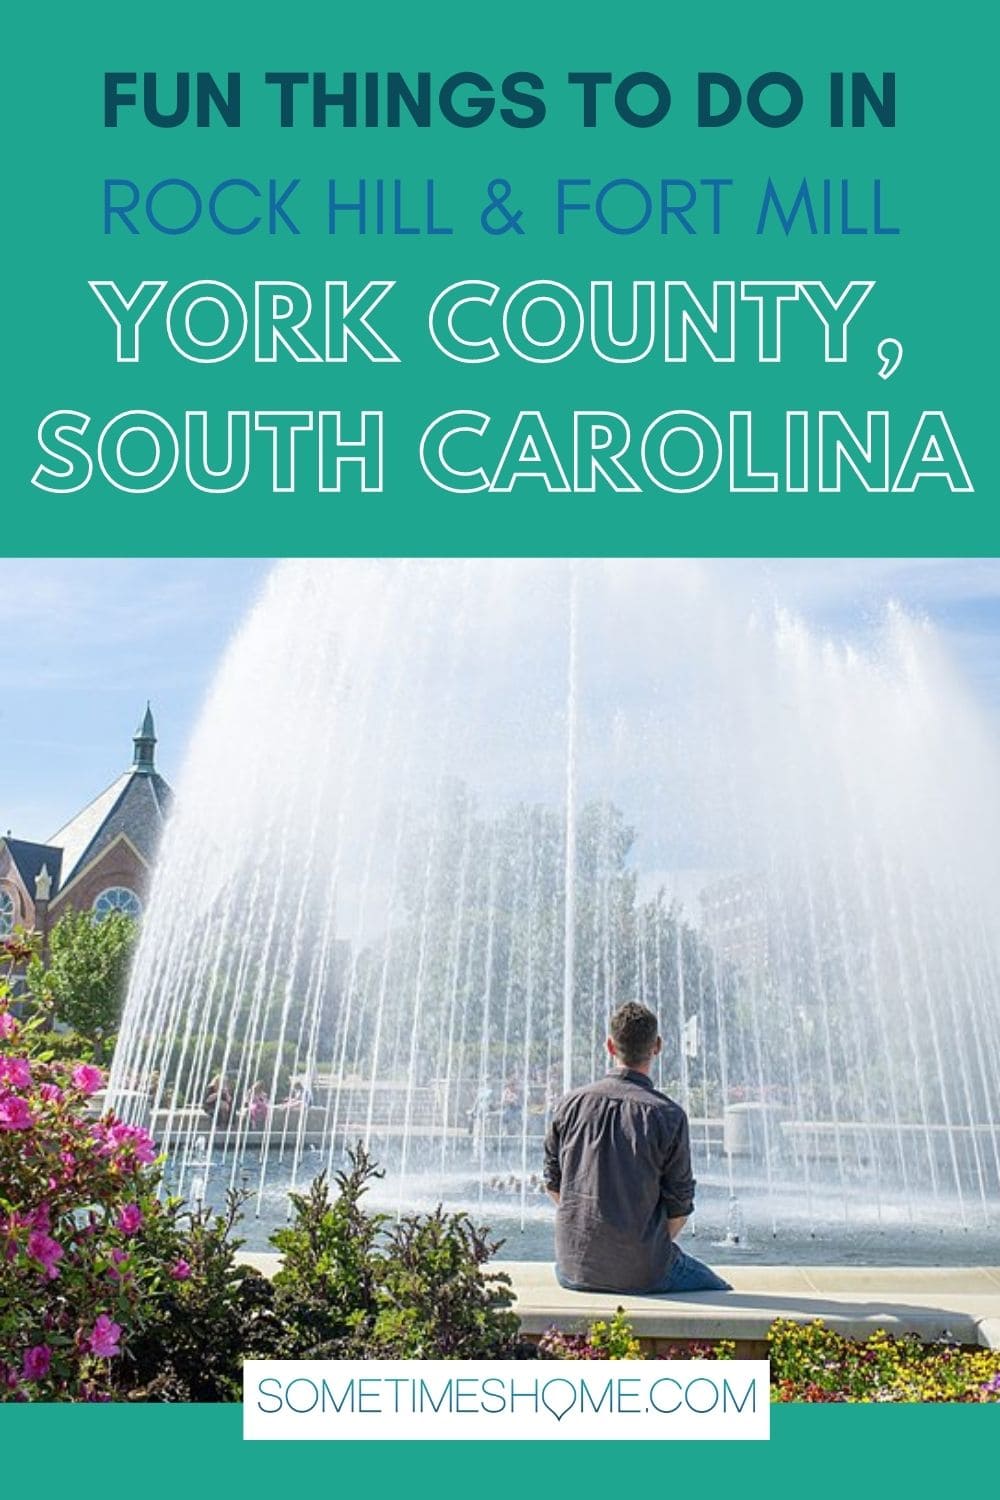 Pinterest image for the best things to do in York County, SC including Rock Hill and Fort Mill, with a photo at Fountain Park.